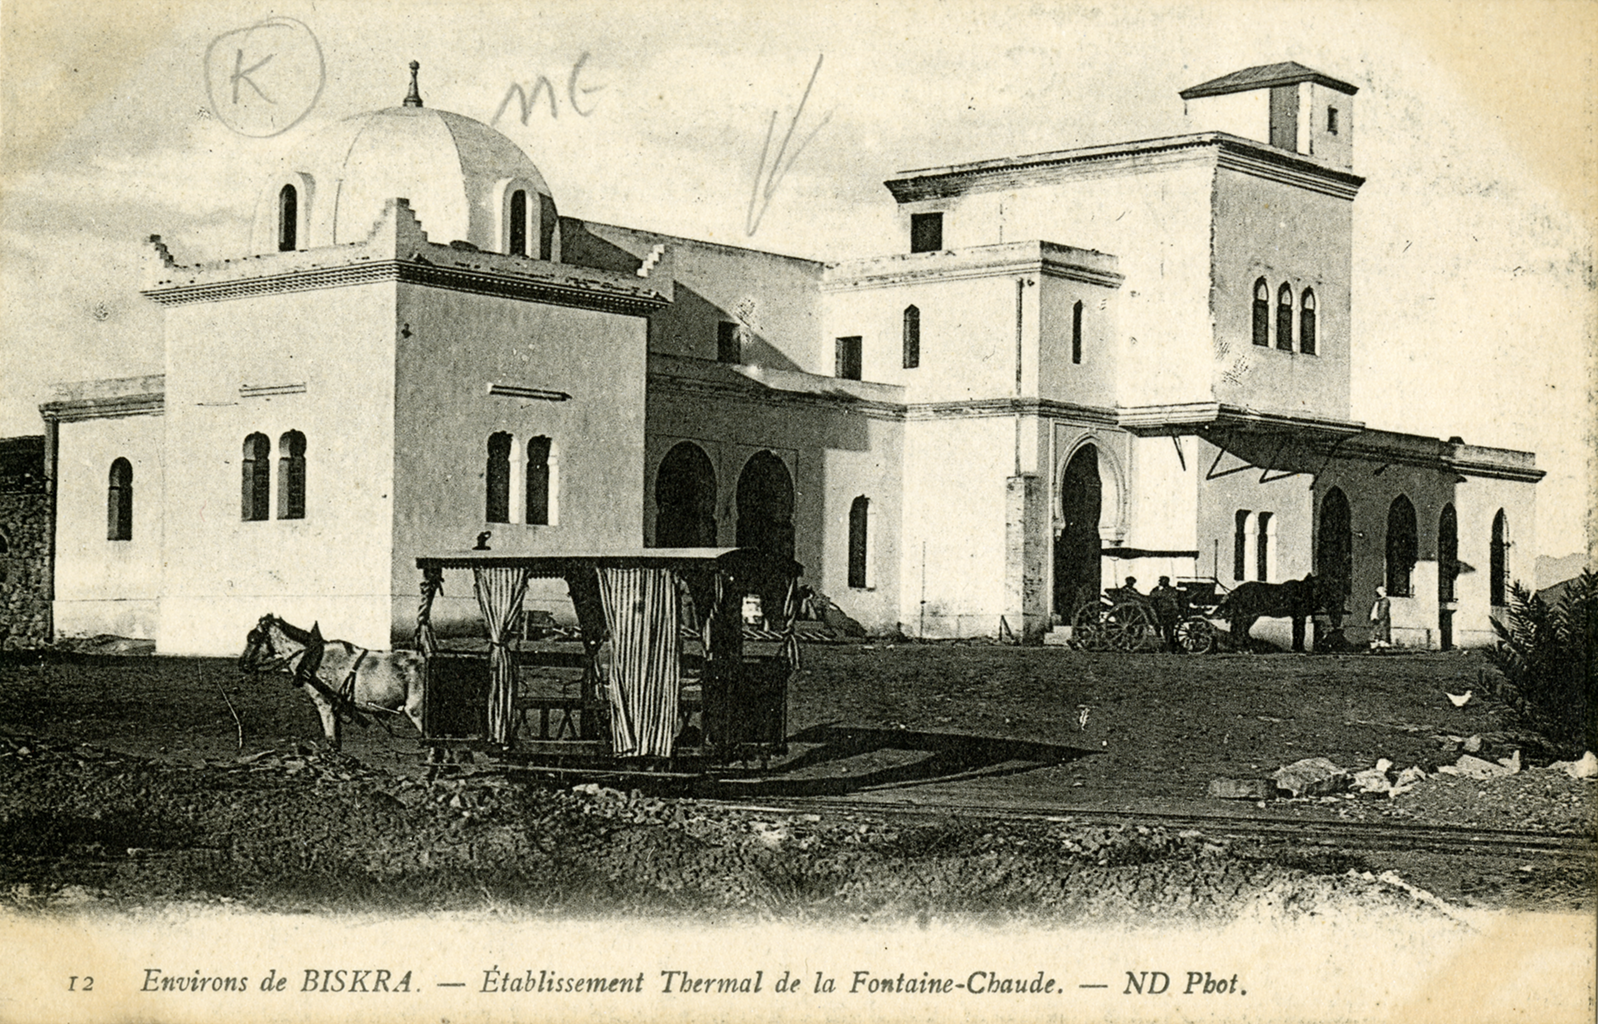 A black and white photograph of a large building with horses and carriages surrounding it. The structure has multiple large with multiple archways floors along with windows on each side.  Under the image it reads &ldquo;Environs de Biskra. – Establishment Thermal de la Fontaine Claude. - ND Phot.&rdquo;